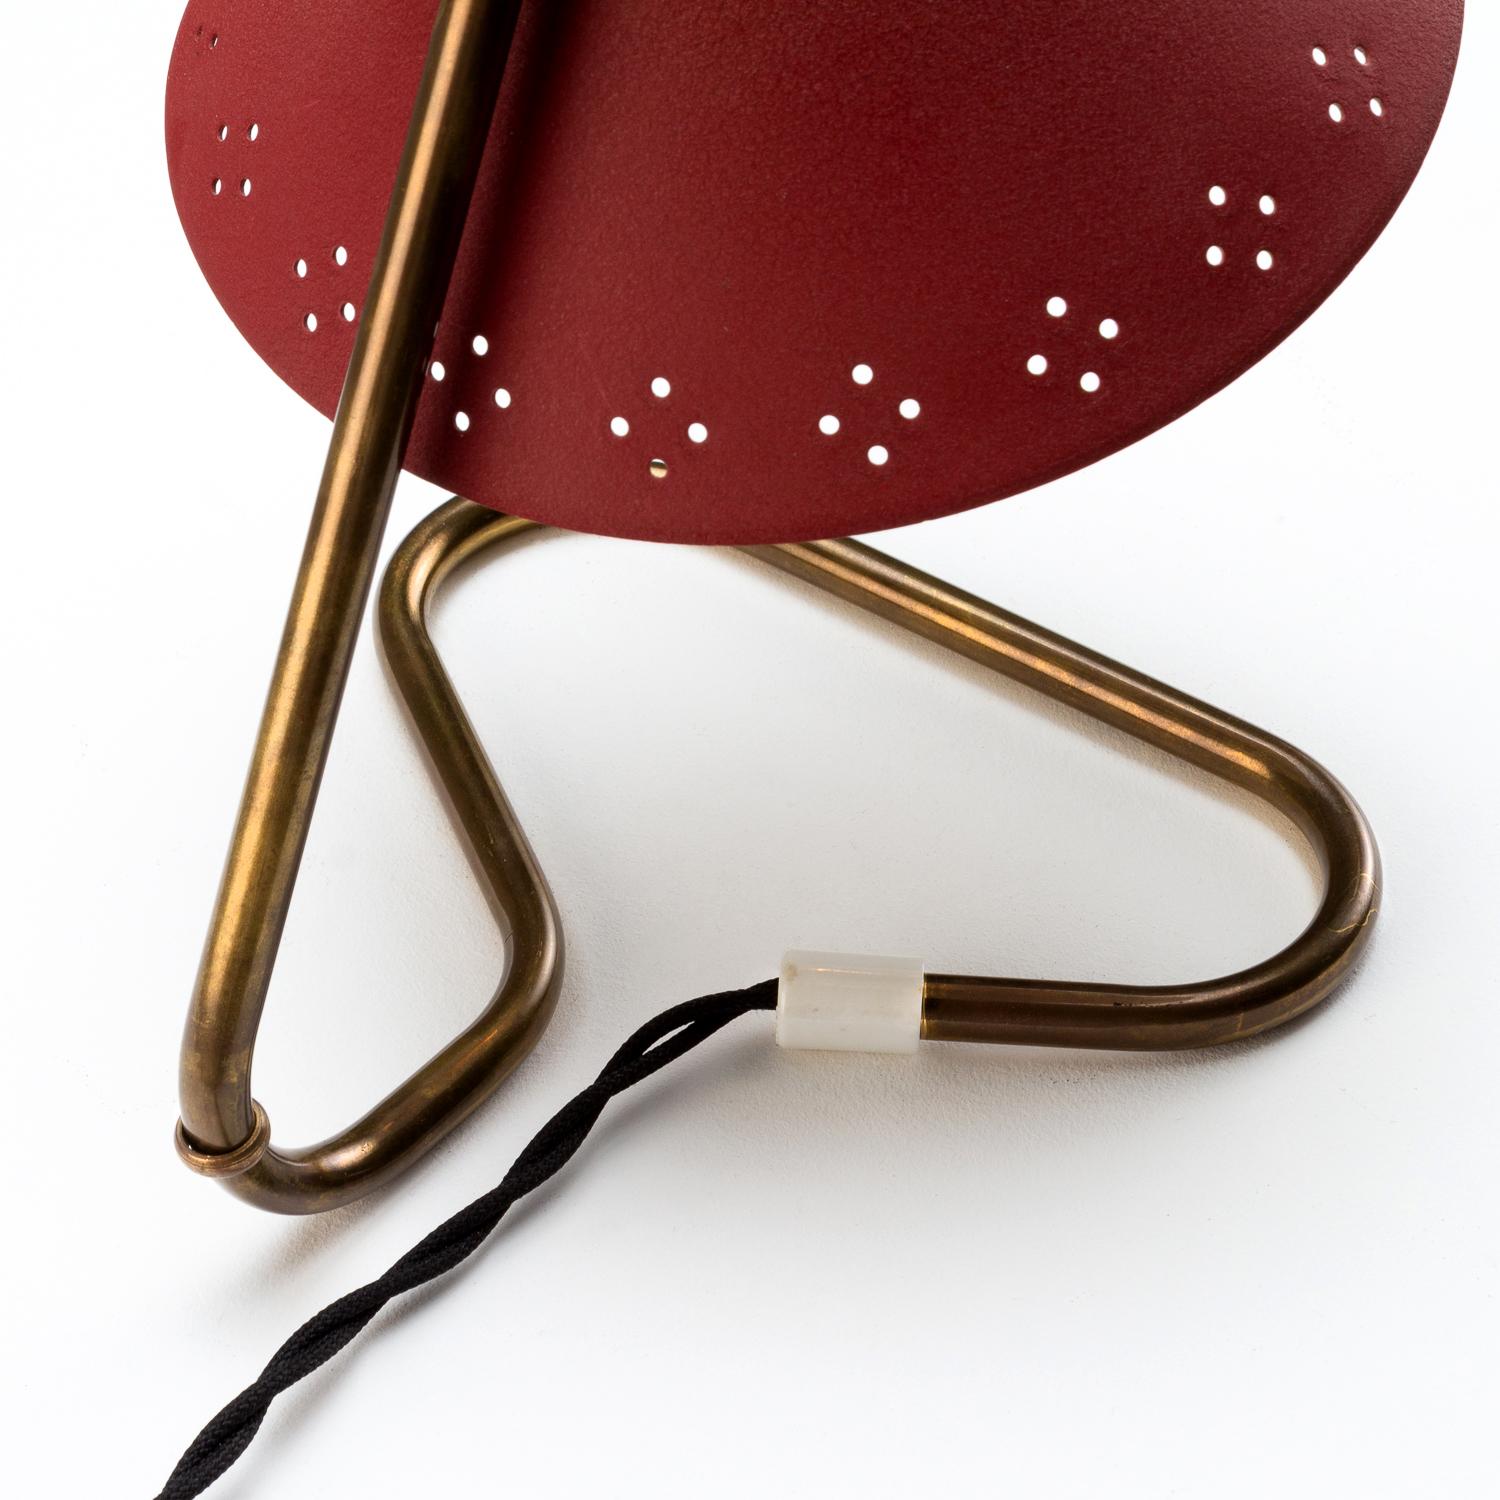 Mid-20th Century Red Lacquered Aluminium and Brass Table Lamp by Gnosjö Konstsmide, Sweden, 1950s For Sale